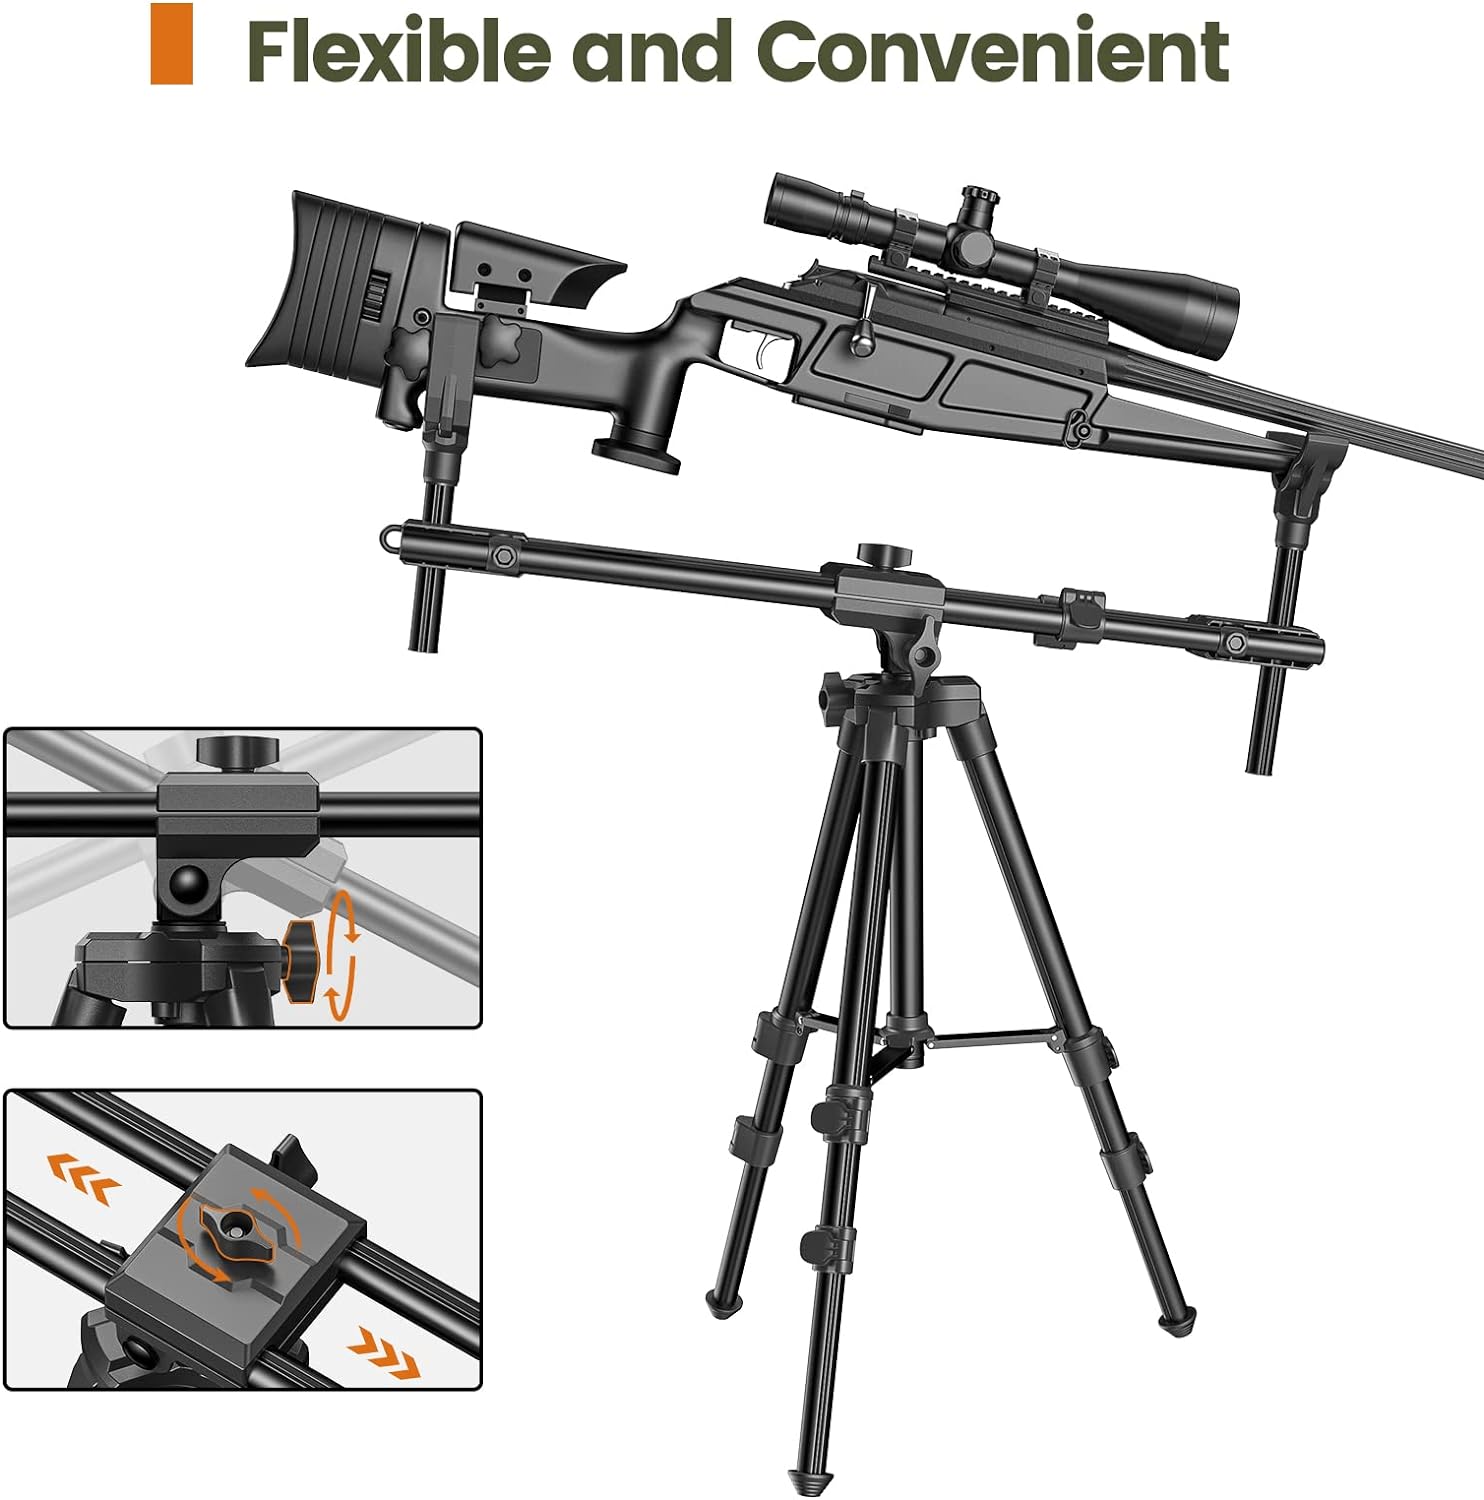 Trakiom Hunting Rests, Shooting Tripod with Dual Frame, Flexible Orientation, Adjustable Height, Shooting Tripod Max Provide Maximum Shooting Stability for Outdoors, Ground Blinds and Hunting